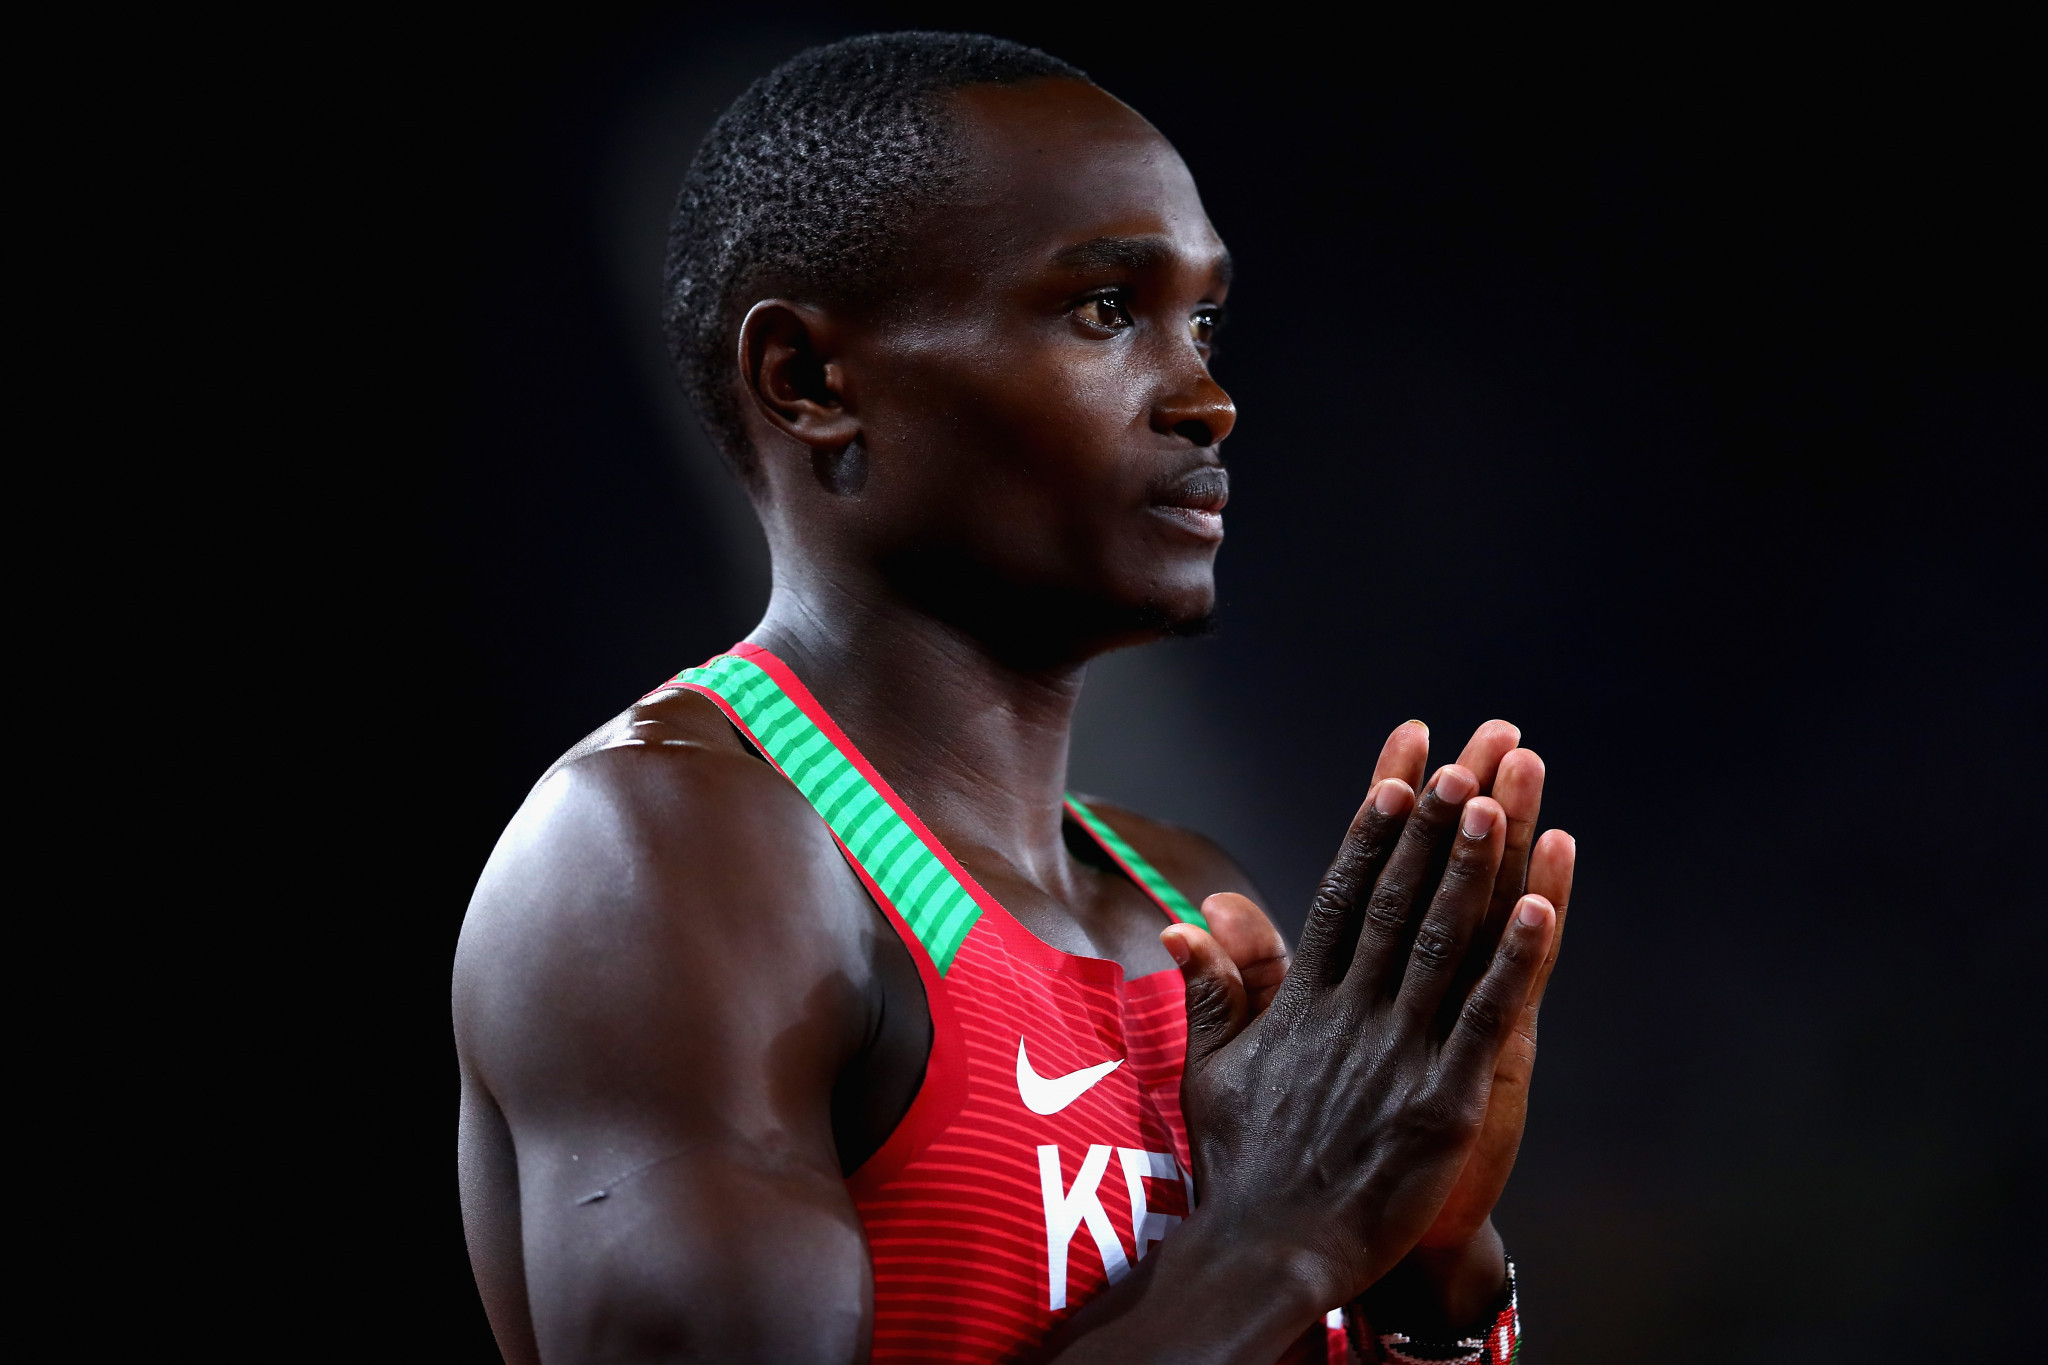 Kenyan sprinter Boniface Mweresa, pictured competing at this year's Commonwealth Games in the Gold Coast, has been implicated in a doping scandal after testing positive, although he blames a supplement ©Getty Images